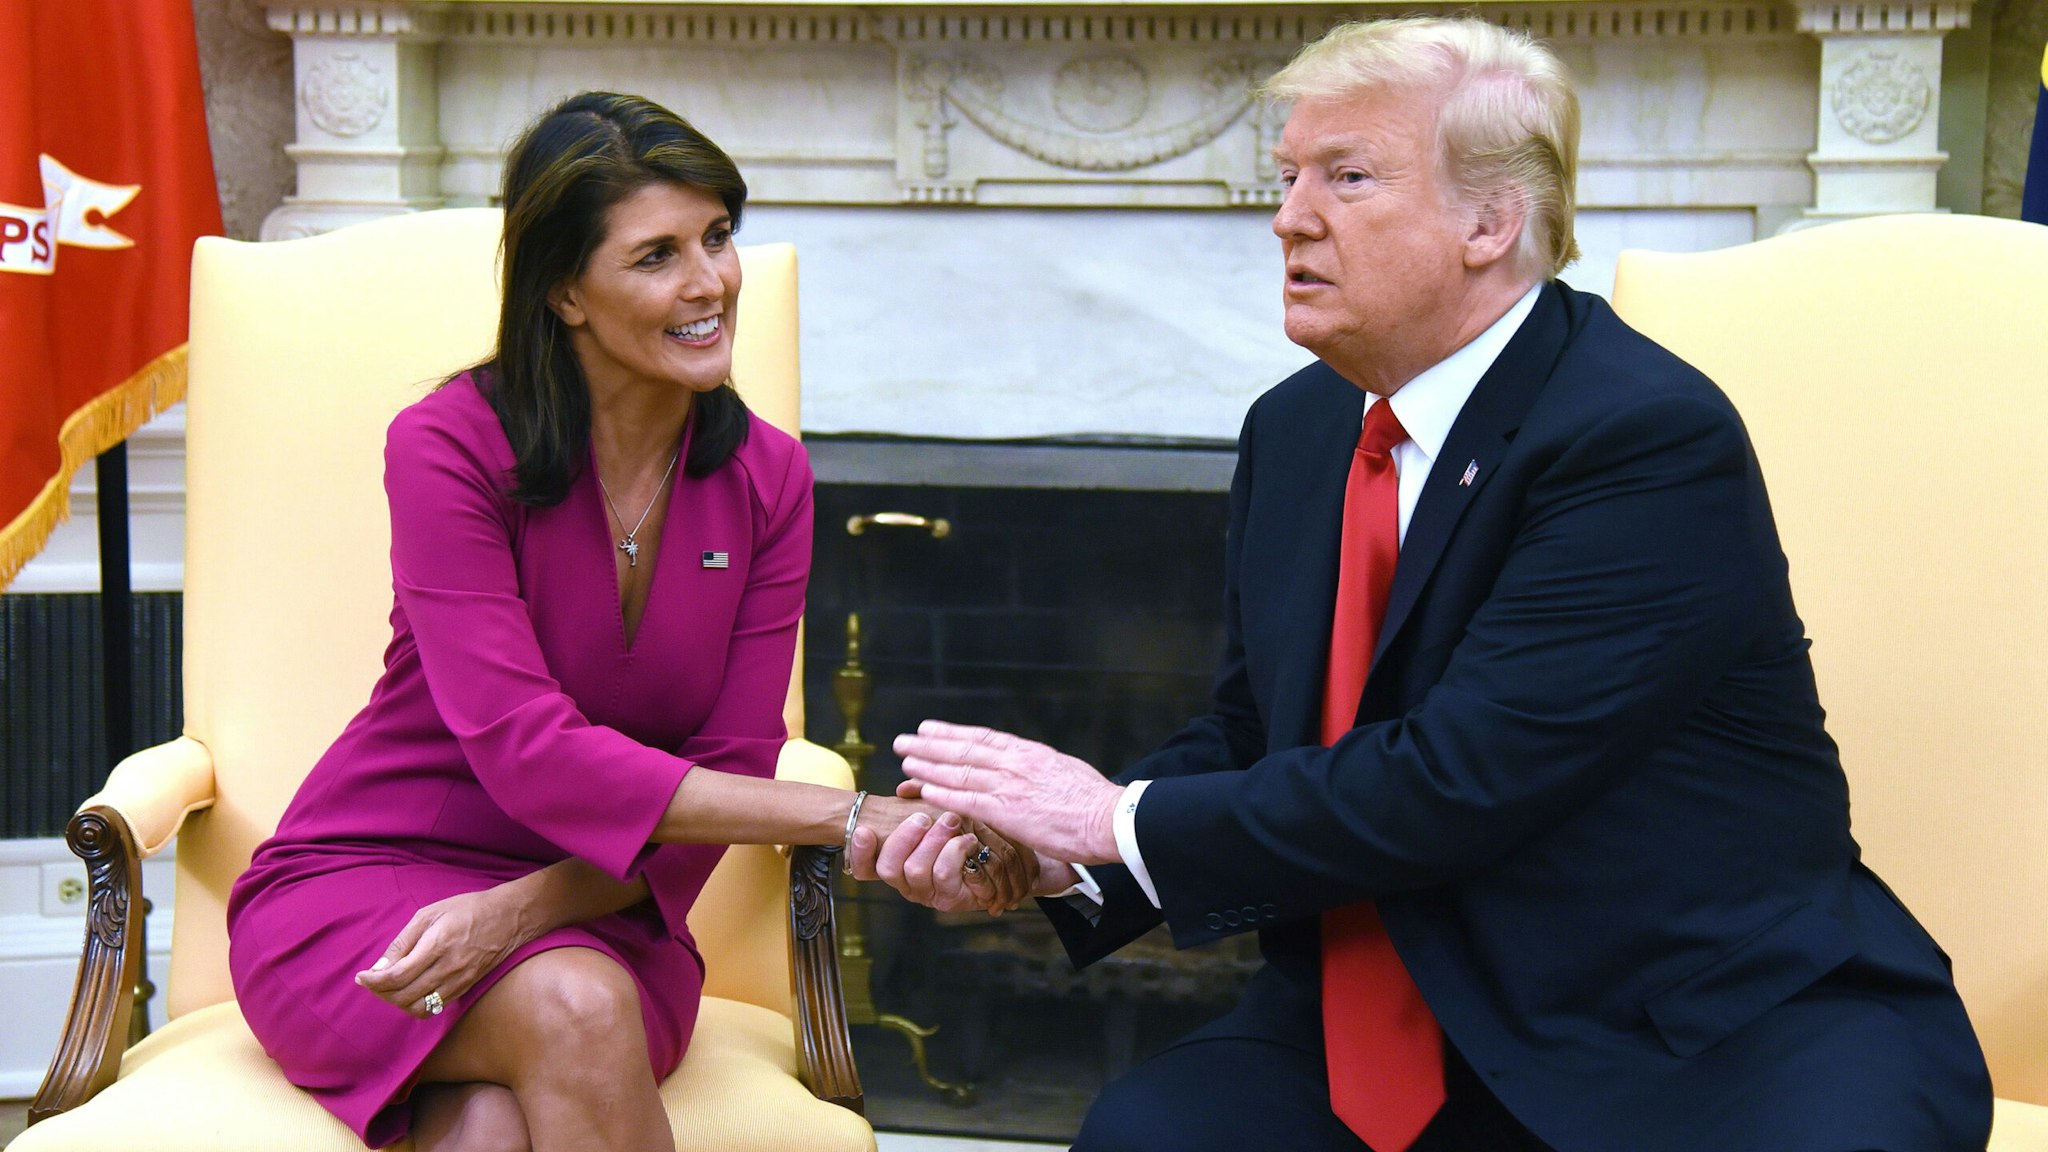 TOPSHOT - US President Donald Trump shakes hands with Nikki Haley, the United States Ambassador to the United Nations in the Oval office of the White House on October 9, 2018 in Washington, DC. - Nikki Haley resigned Tuesday as the US ambassador to the United Nations, in the latest departure from President Donald Trump's national security team. Meeting Haley in the Oval Office, Trump said that Haley had done a "fantastic job" and would leave at the end of the year.